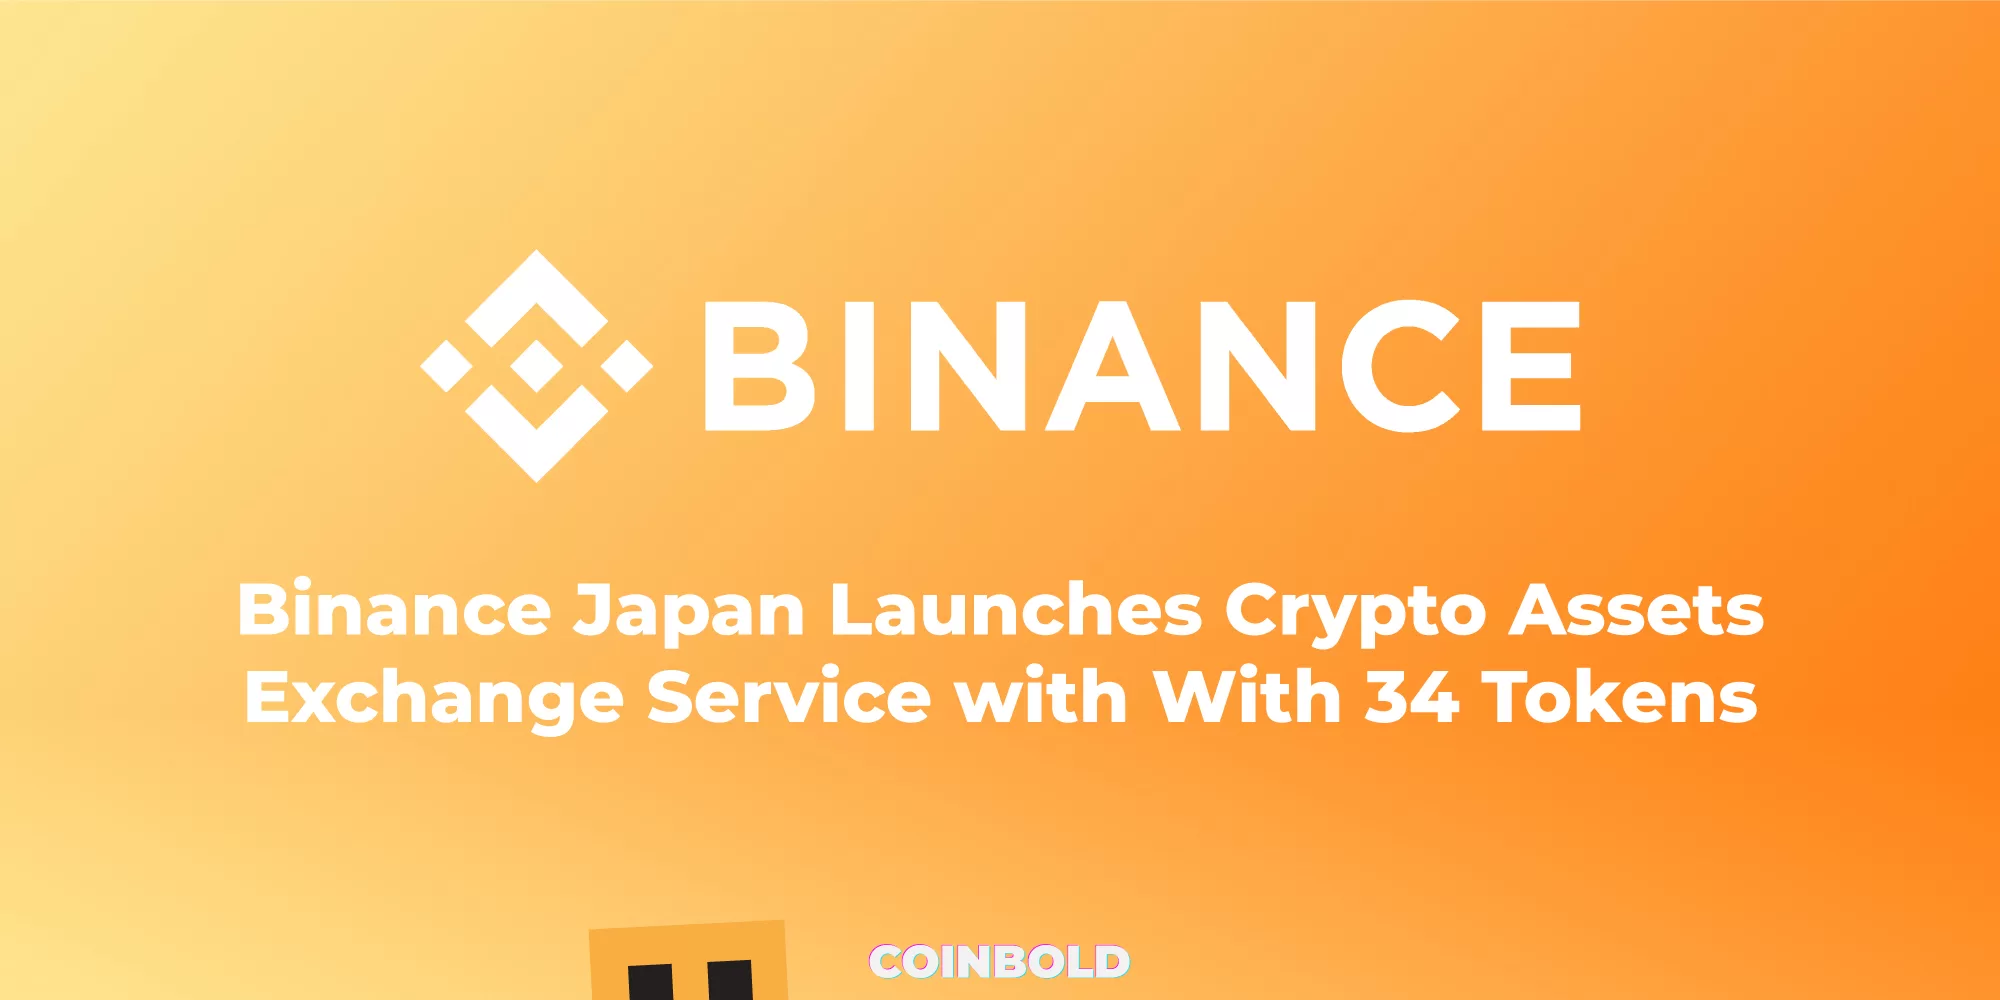 Binance Japan Launches Crypto Assets Exchange Service with With 34 Tokens